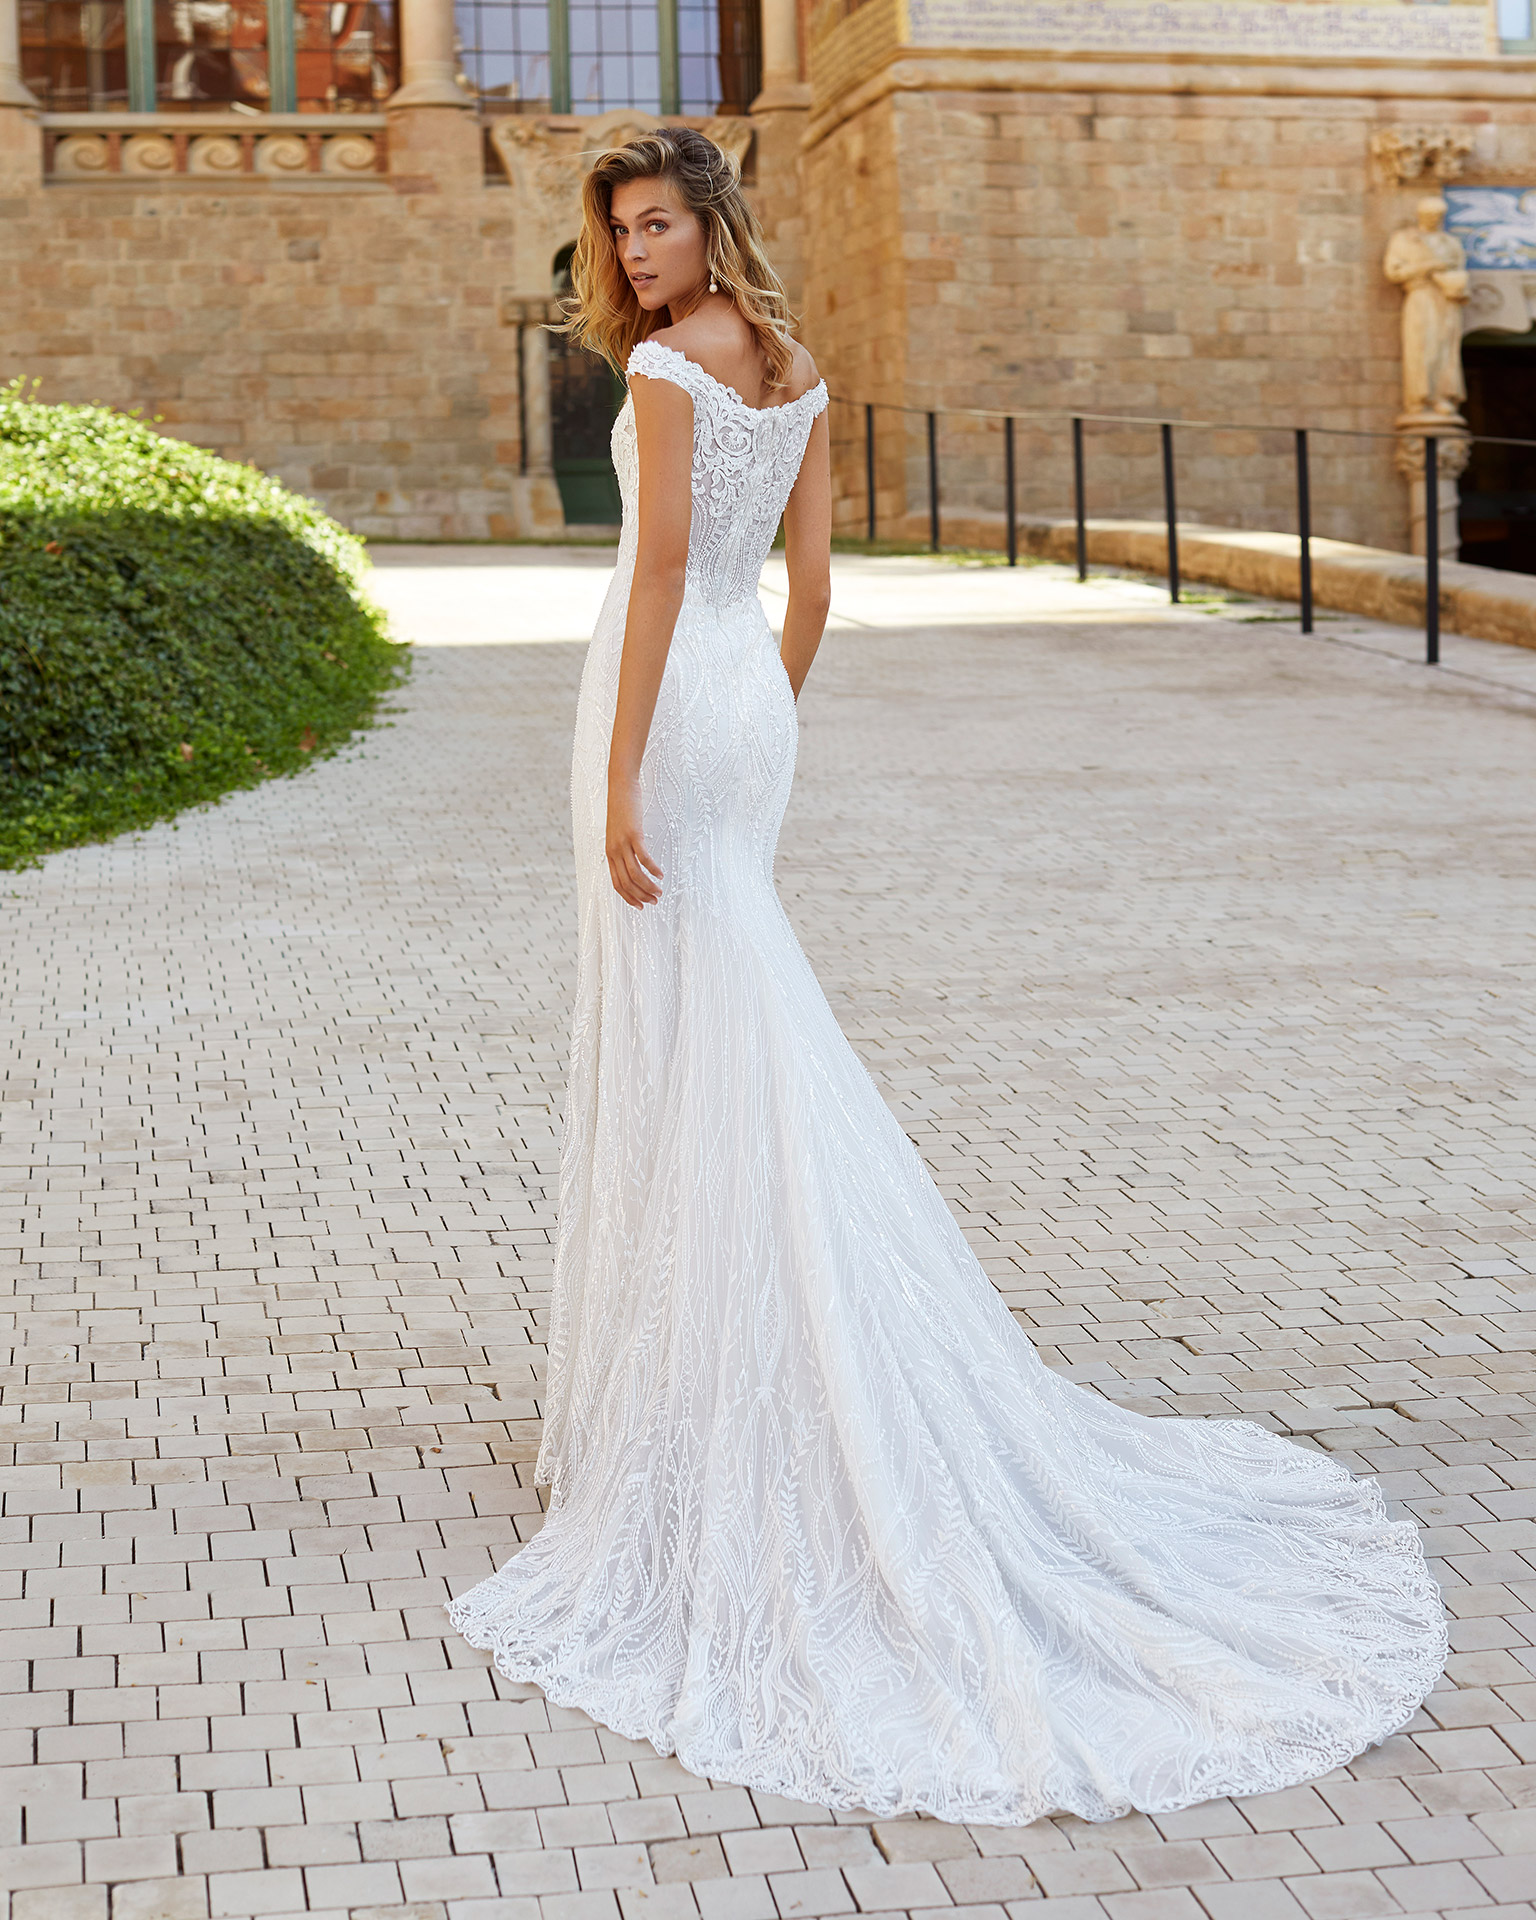 Sheath-style wedding dress in beaded lace. Sweetheart neckline with off-the-shoulder straps. 2021  Collection.